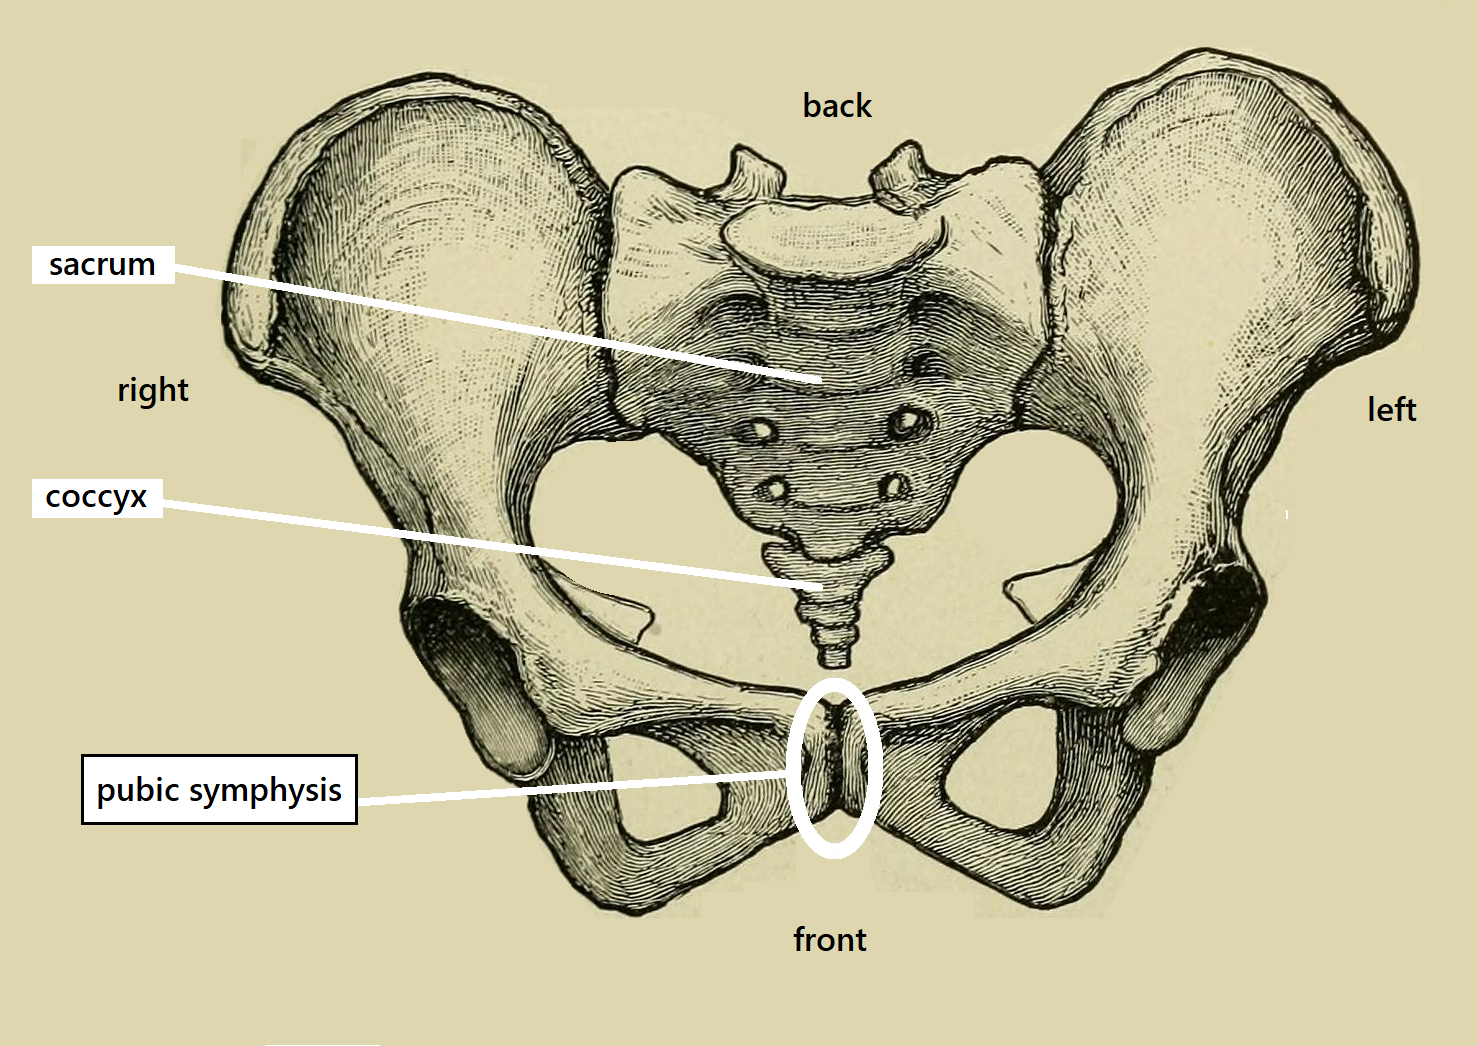 the bones of the pelvis, sacrum and coccyx seen from the front. The pubic symphysis is where the pubic bones meet on our midline.